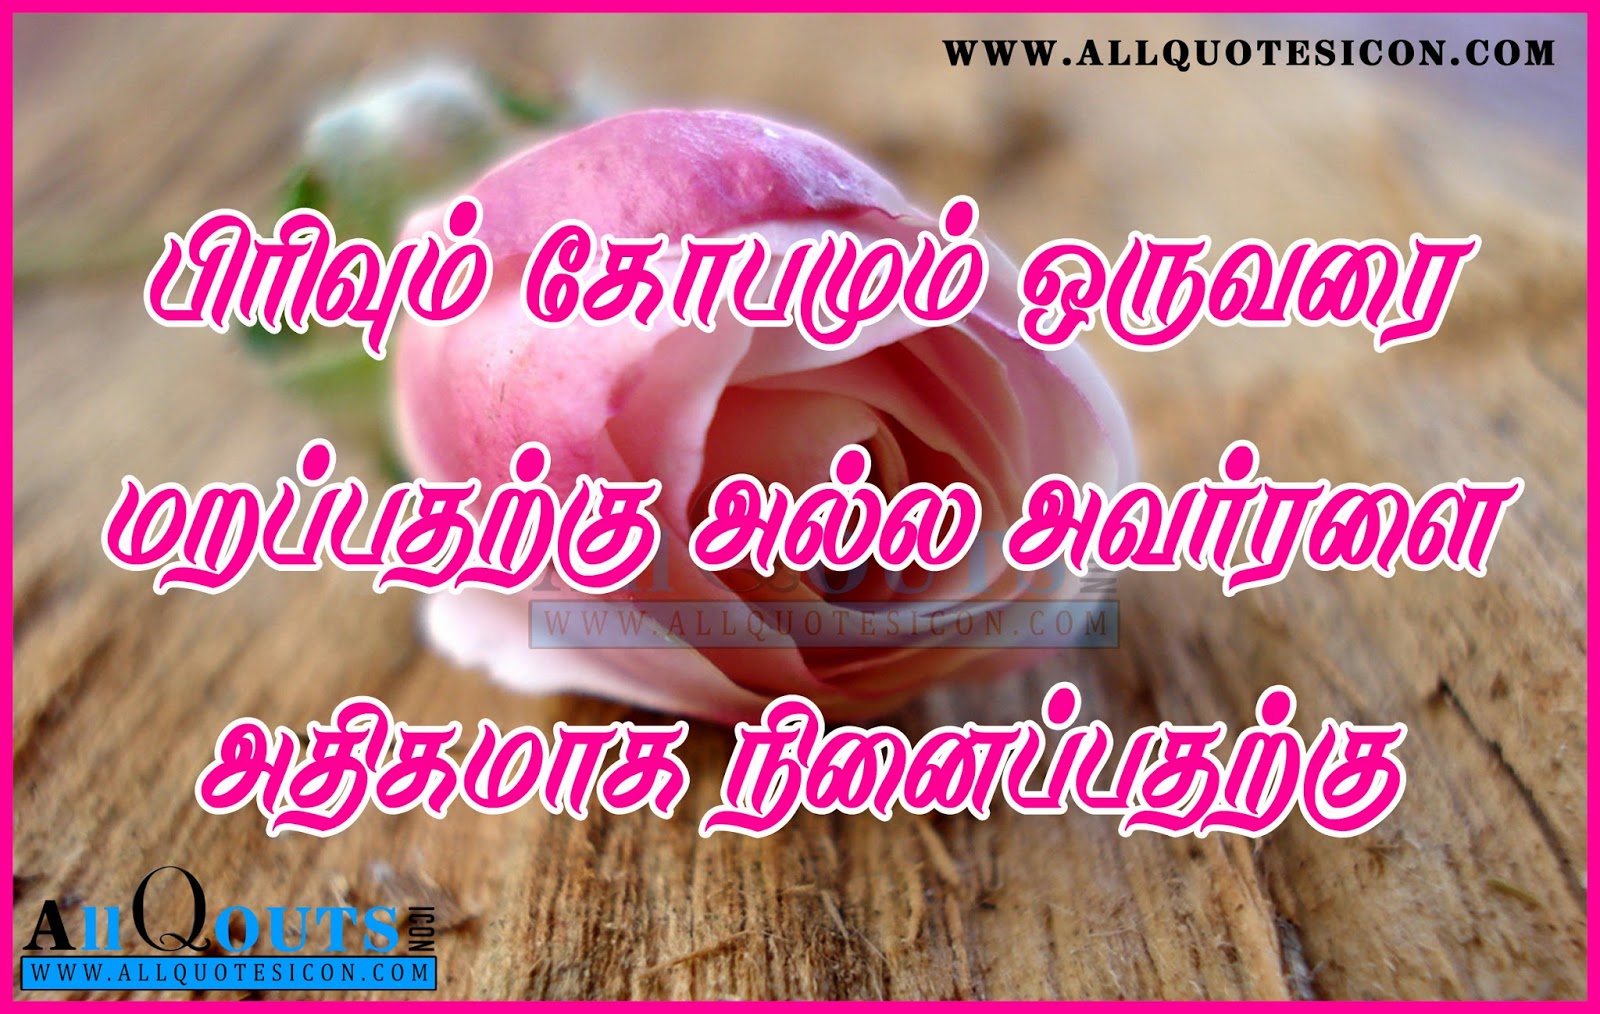 Tamil quotes images thoughts Love Friendship inspiration motivation